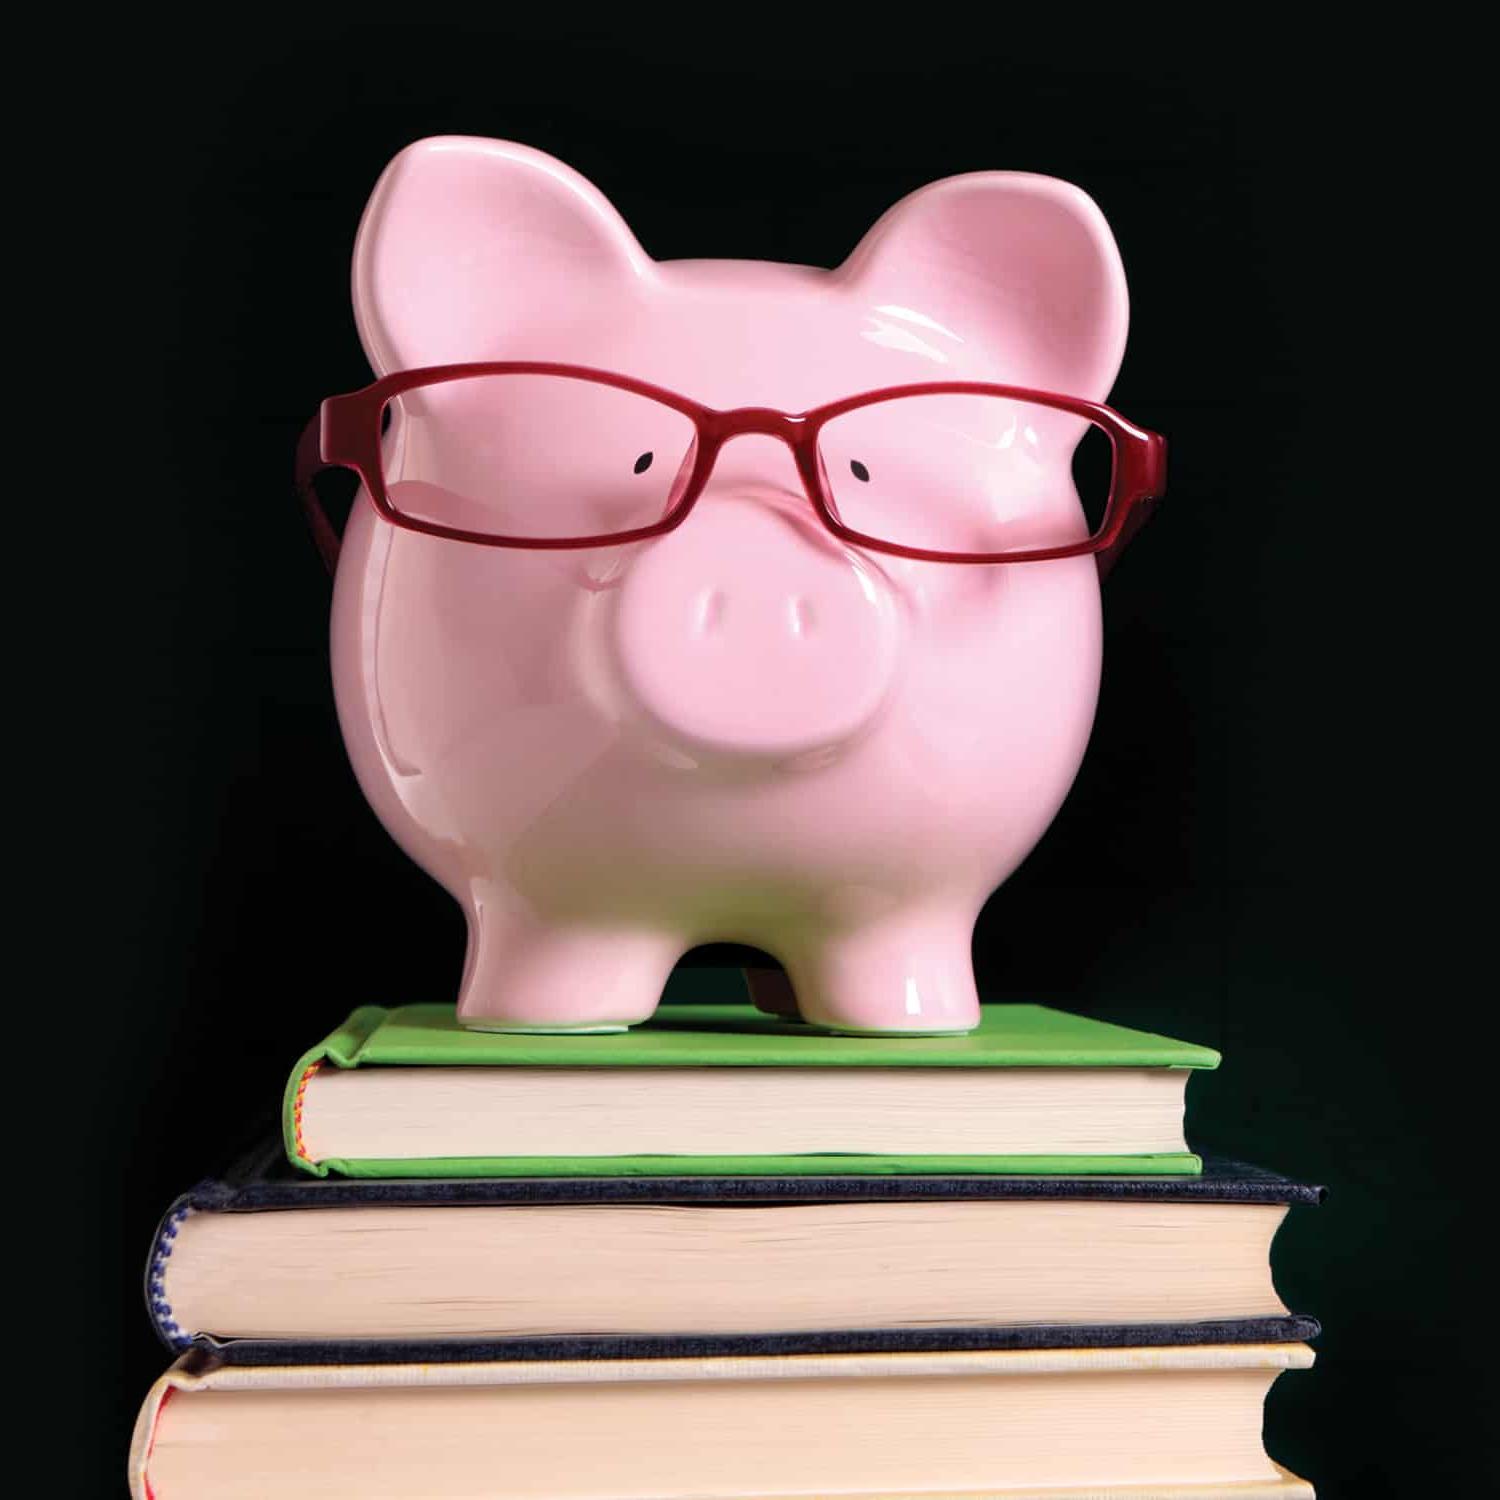 pink piggy bank wearing red glasses on stack of books